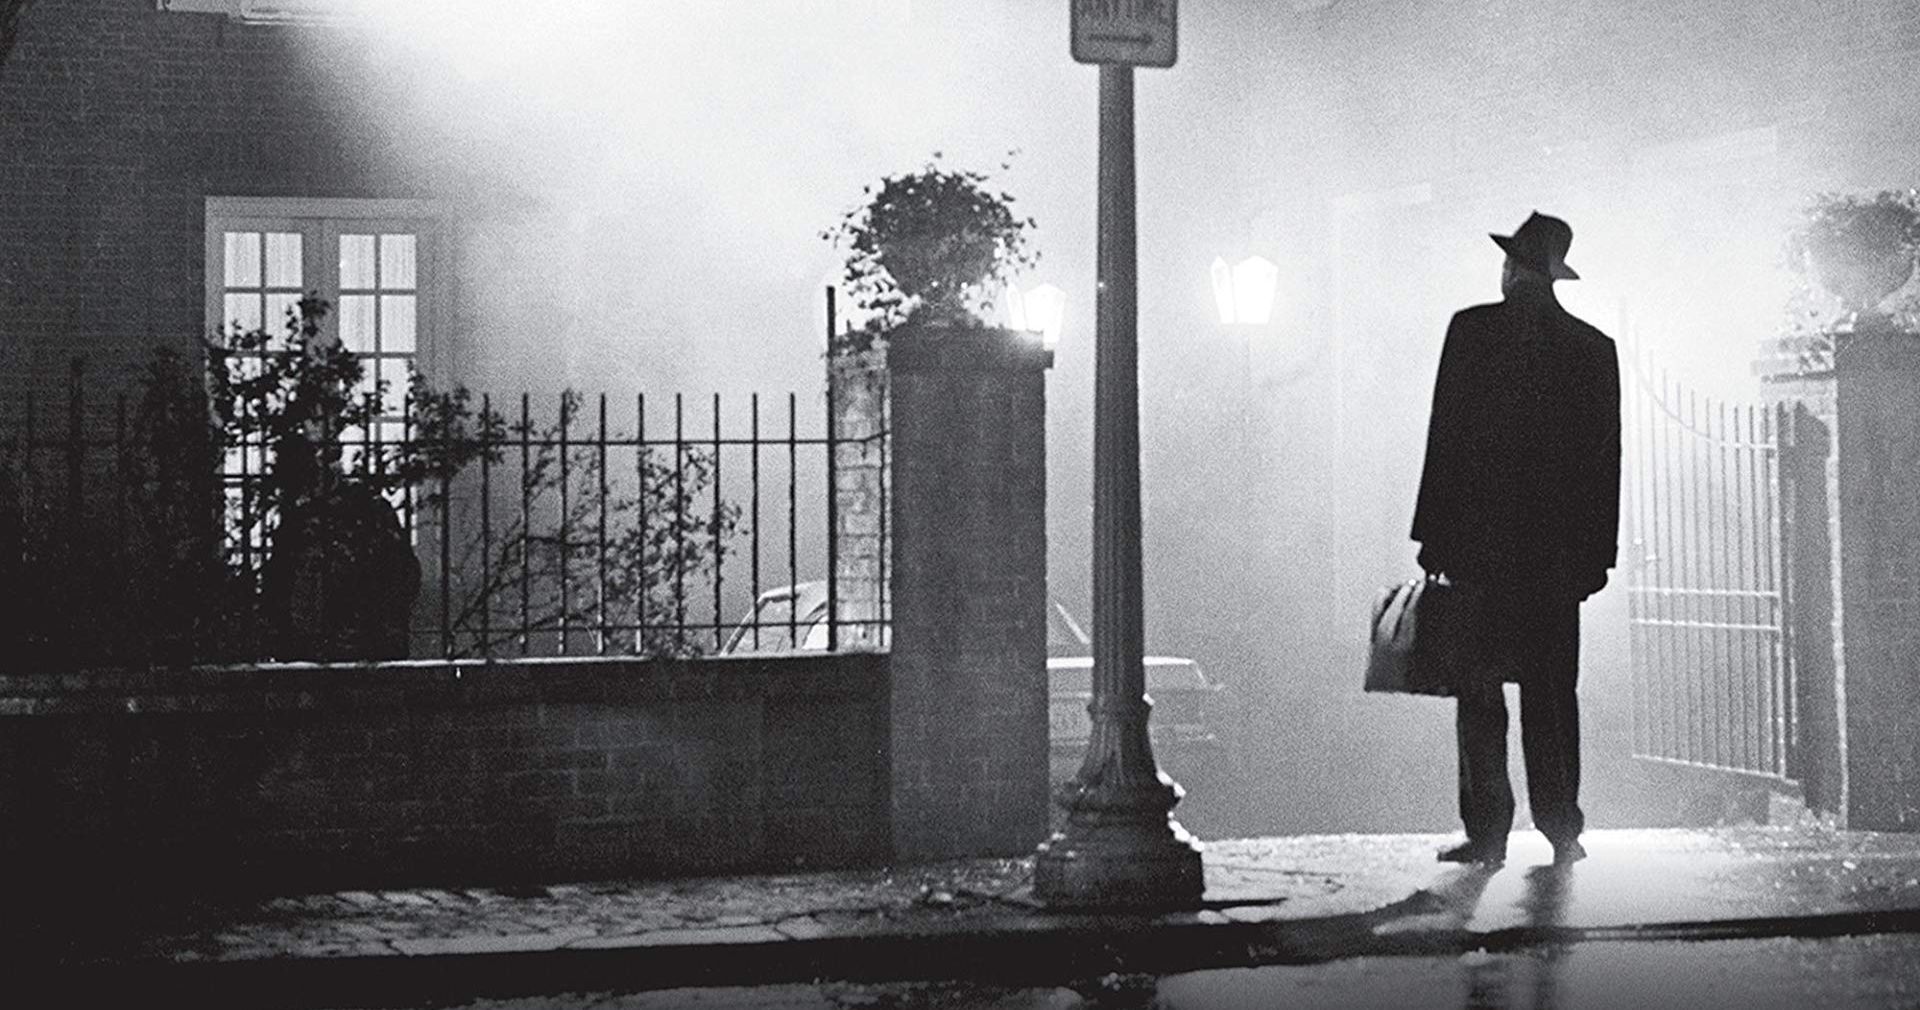 The Exorcist Sequel Is Happening at Blumhouse with Halloween Director David Gordon Green